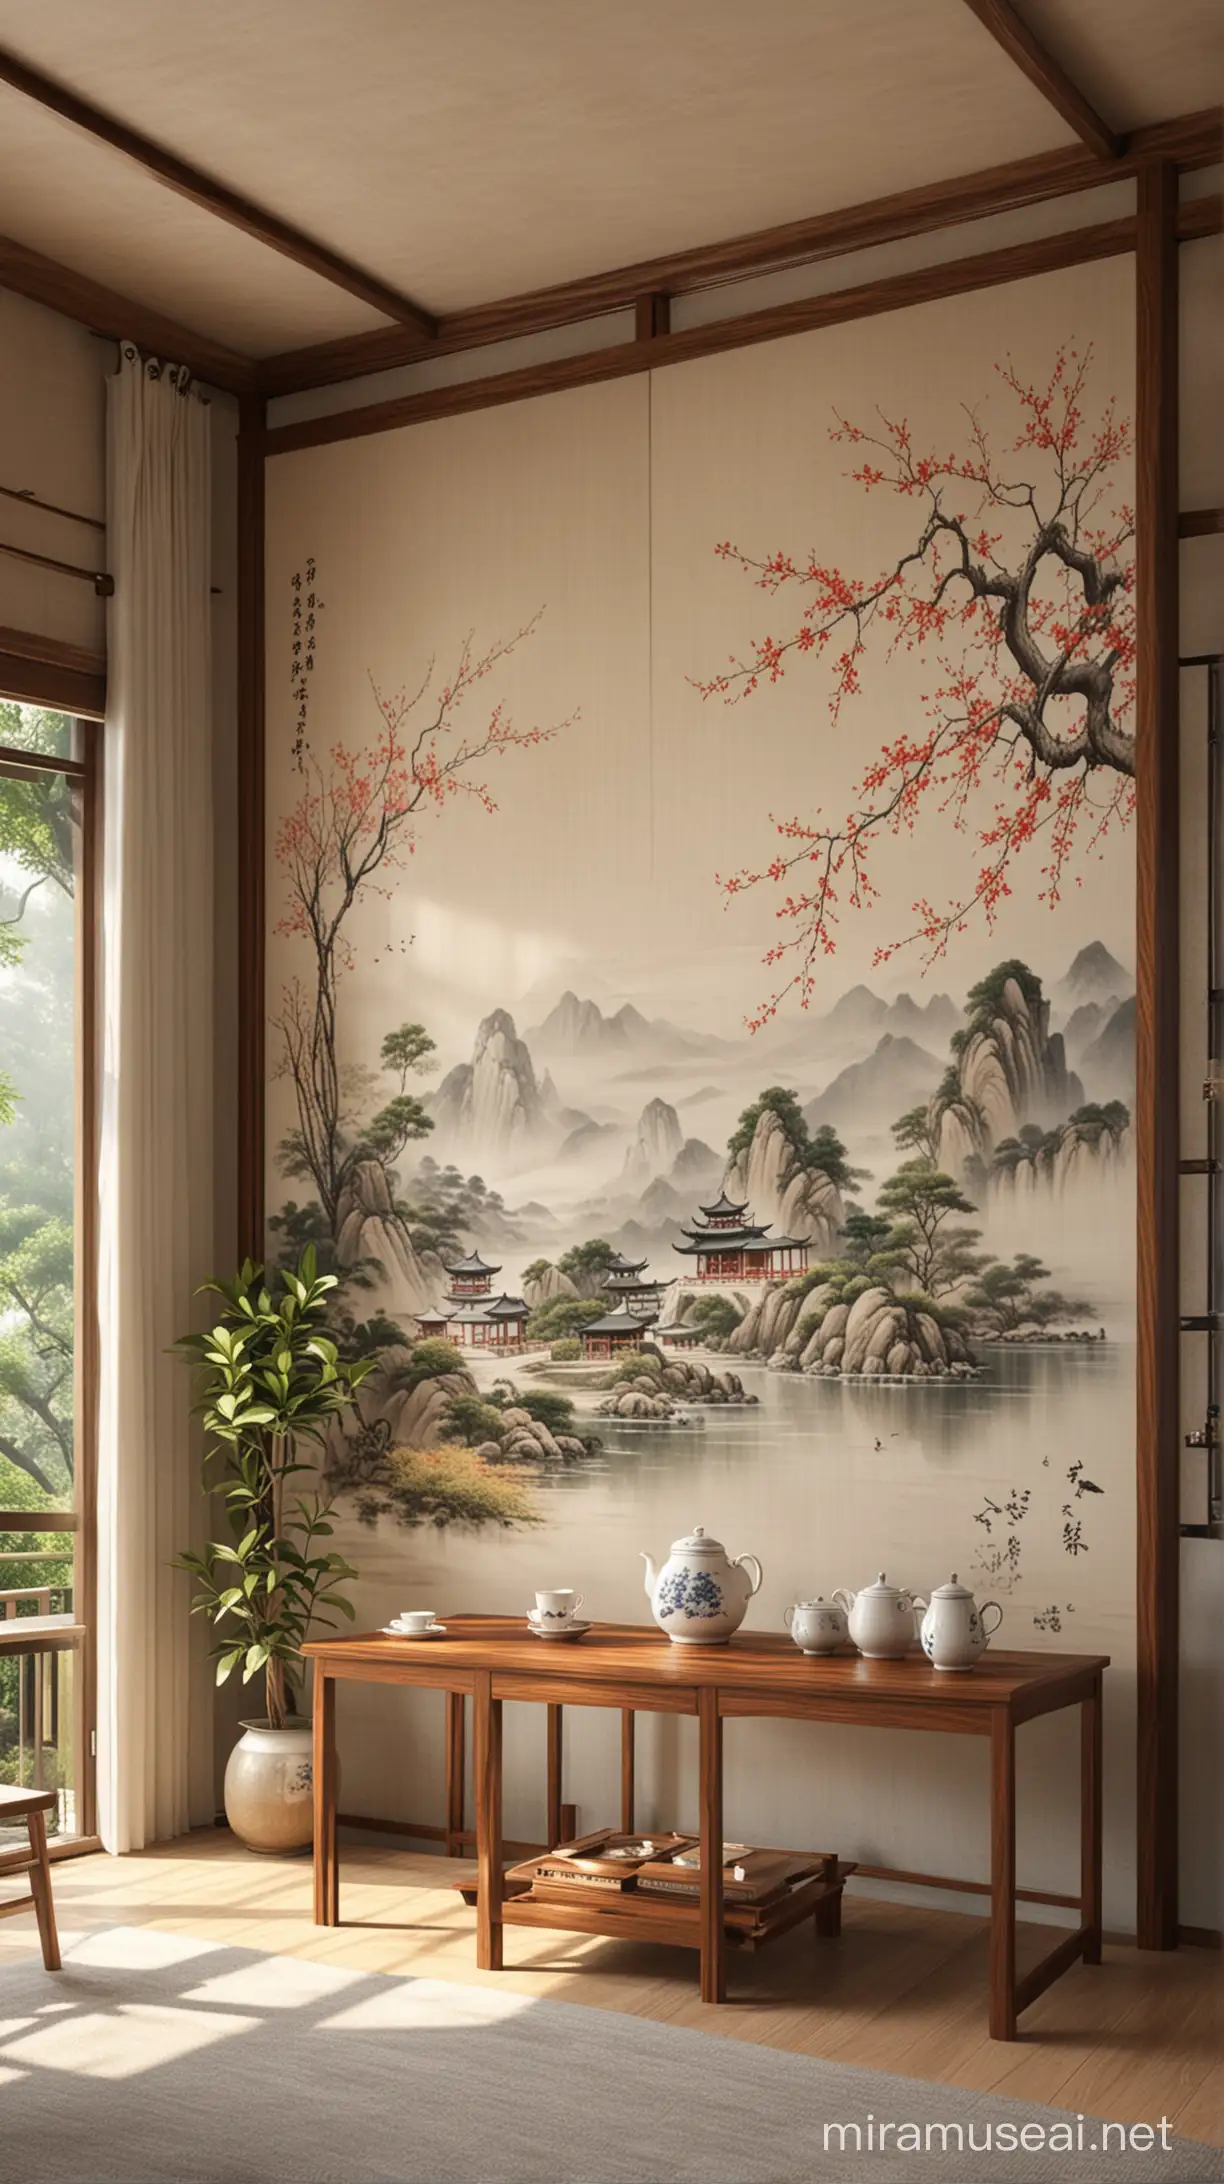 Youthful Energy in a Traditional Chinese Study Room with Tea and Atmospheric Aesthetics